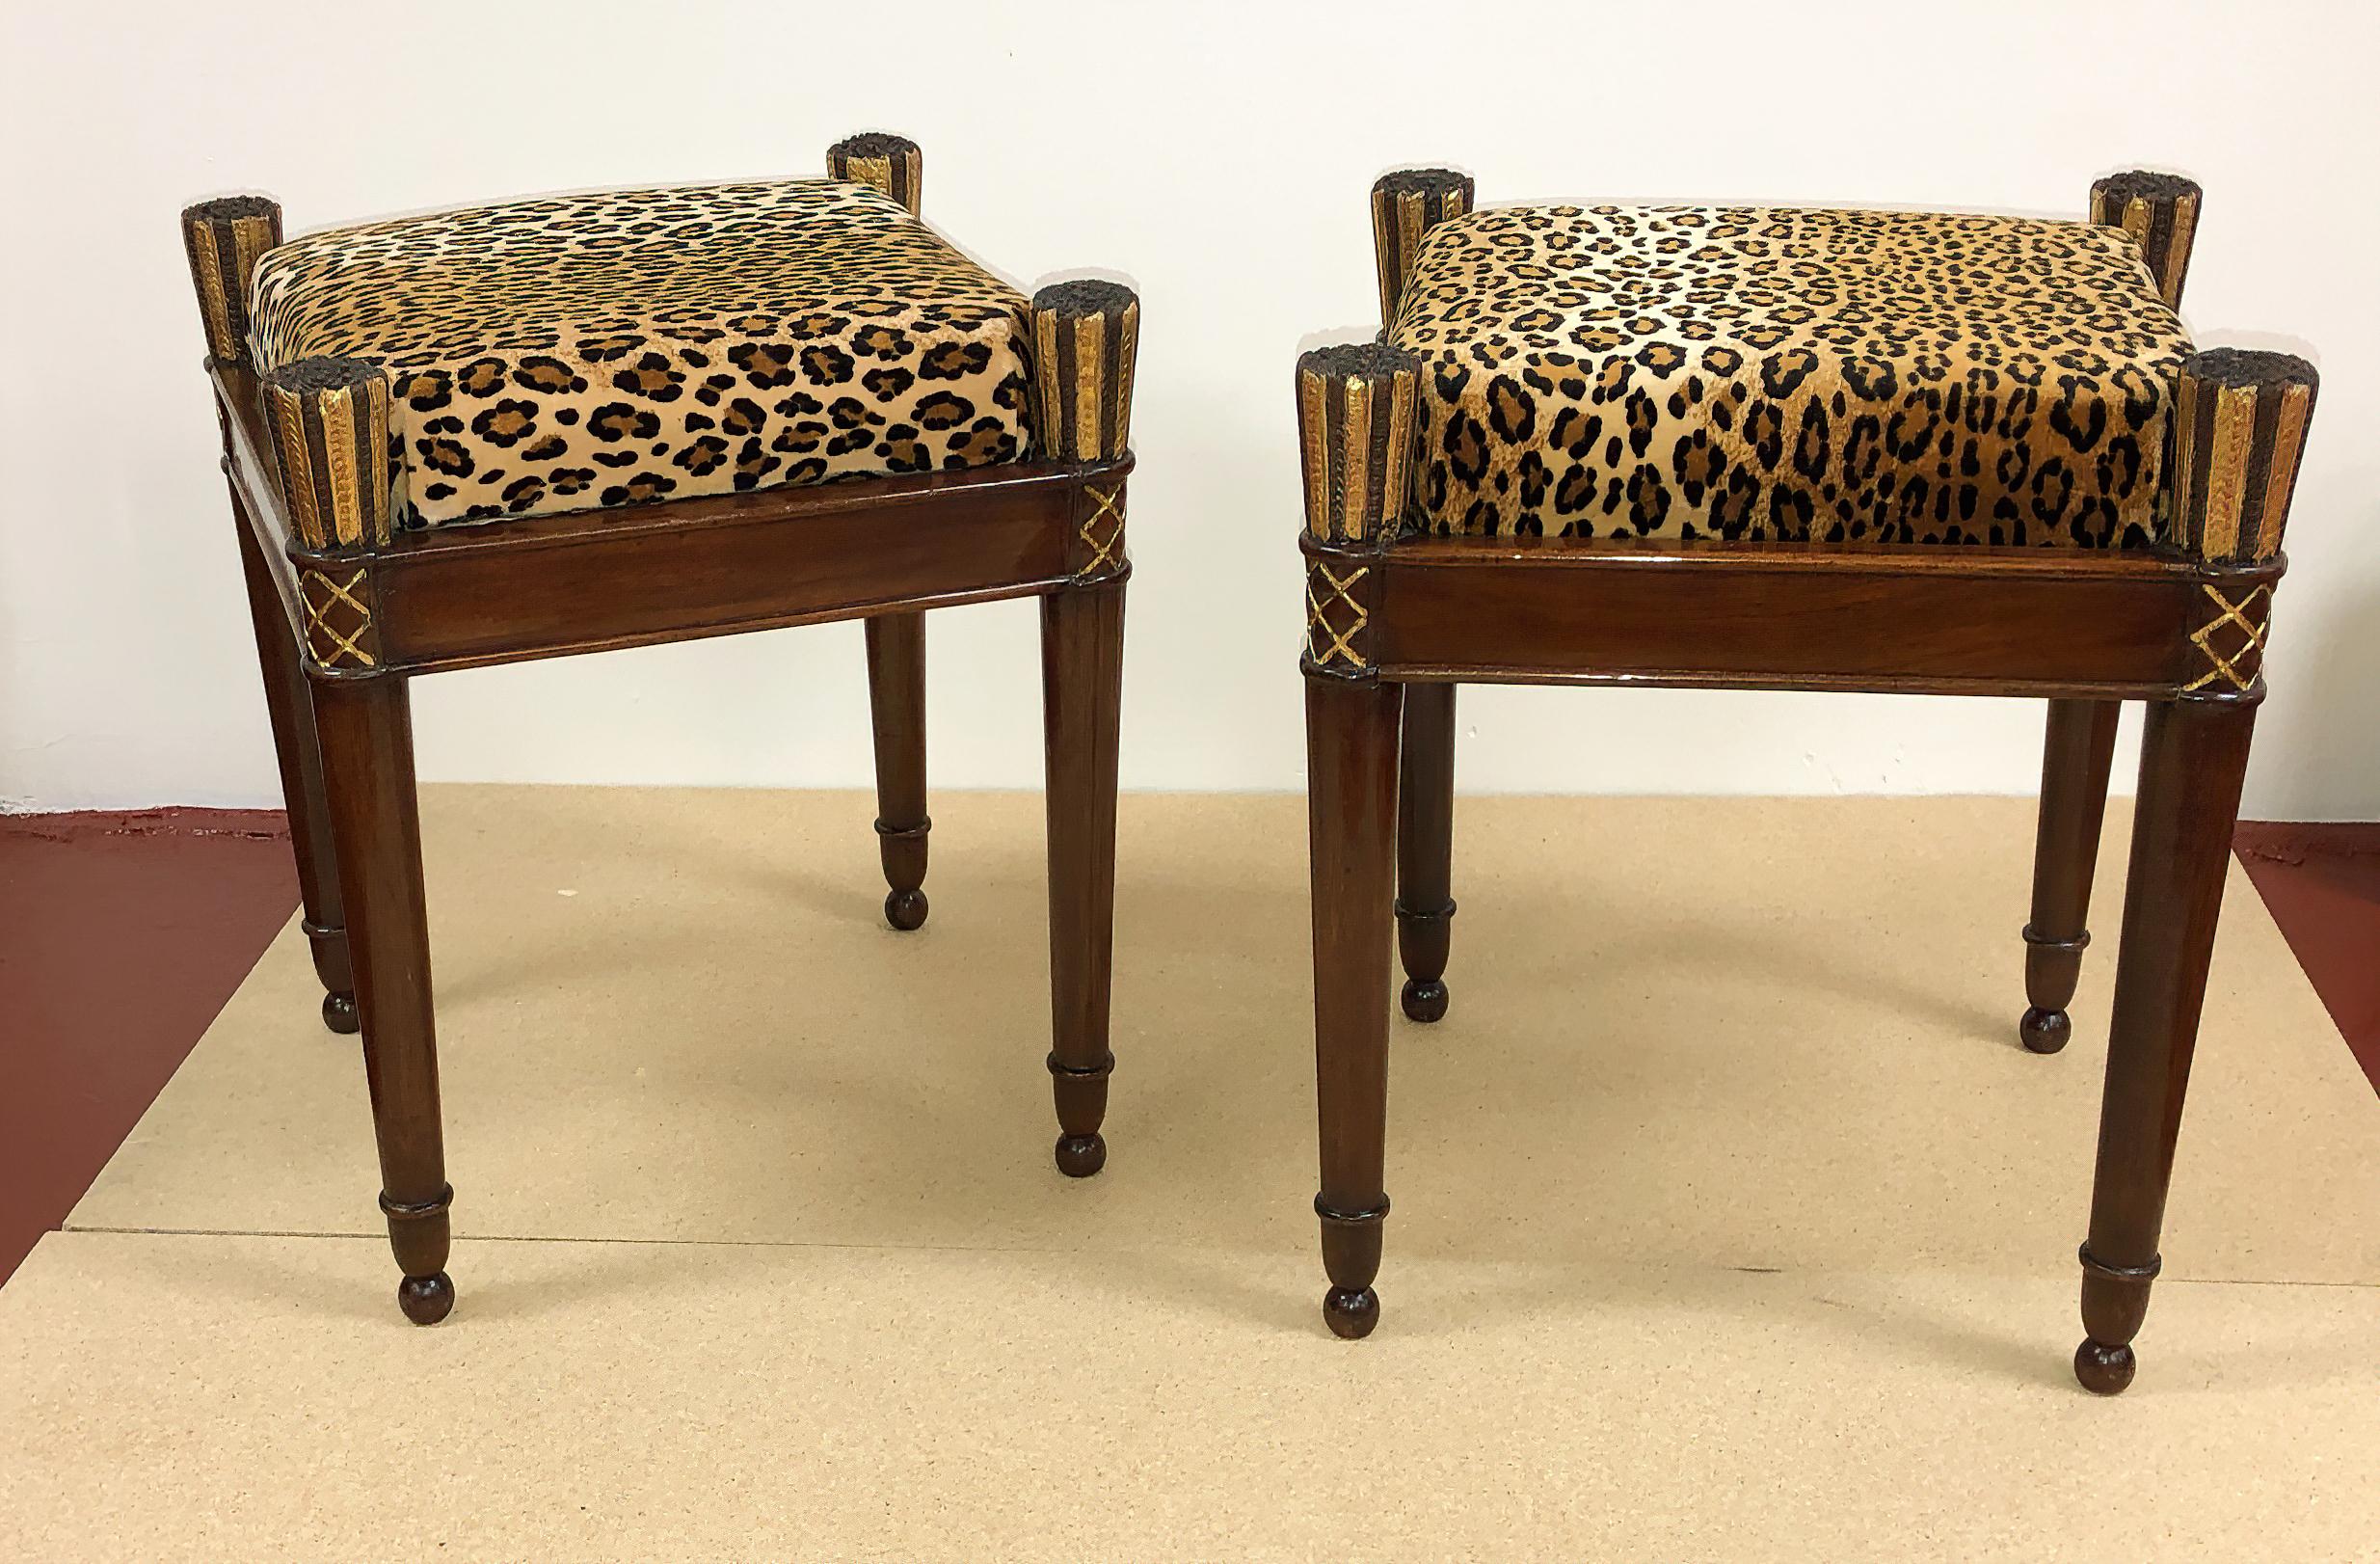 A fine pair of French Directoire mahogany stools with crushed velvet Leopard upholstery, a square mahogany frame with carved and gilded arrow feather and quiver form legs that are turned and tapered, and ending in ball feet.